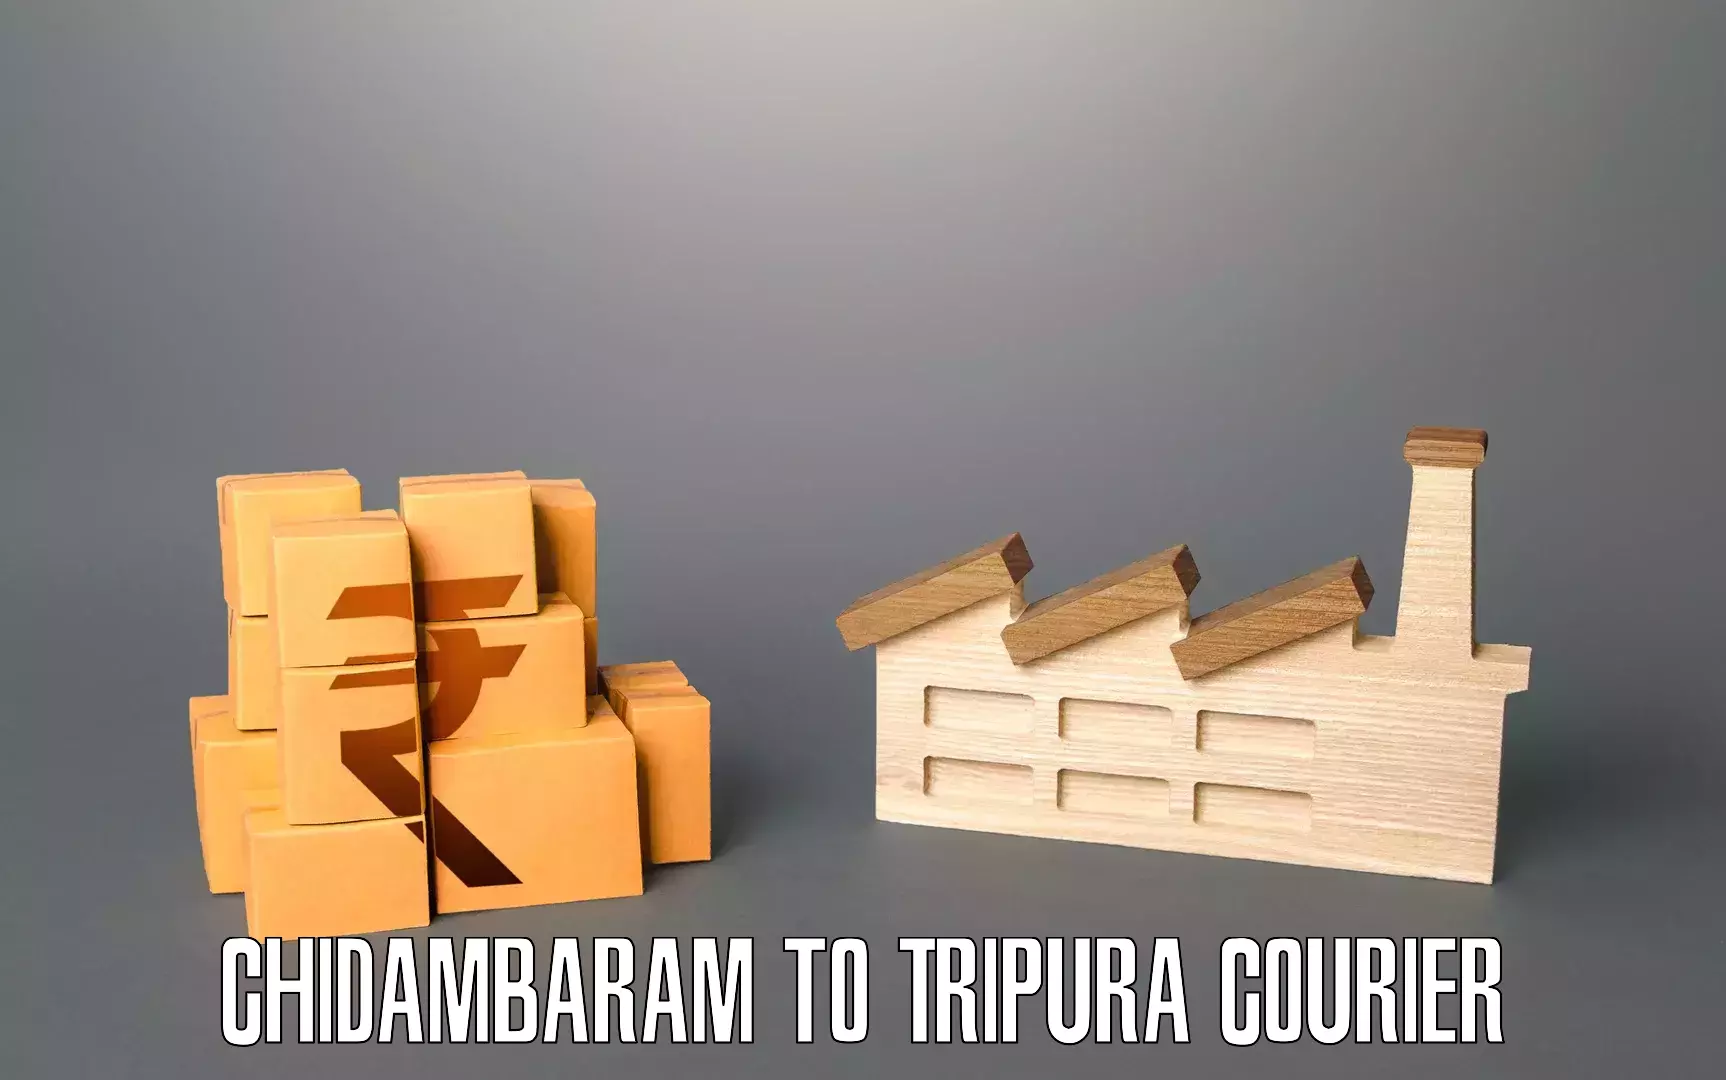 Trusted relocation experts Chidambaram to West Tripura